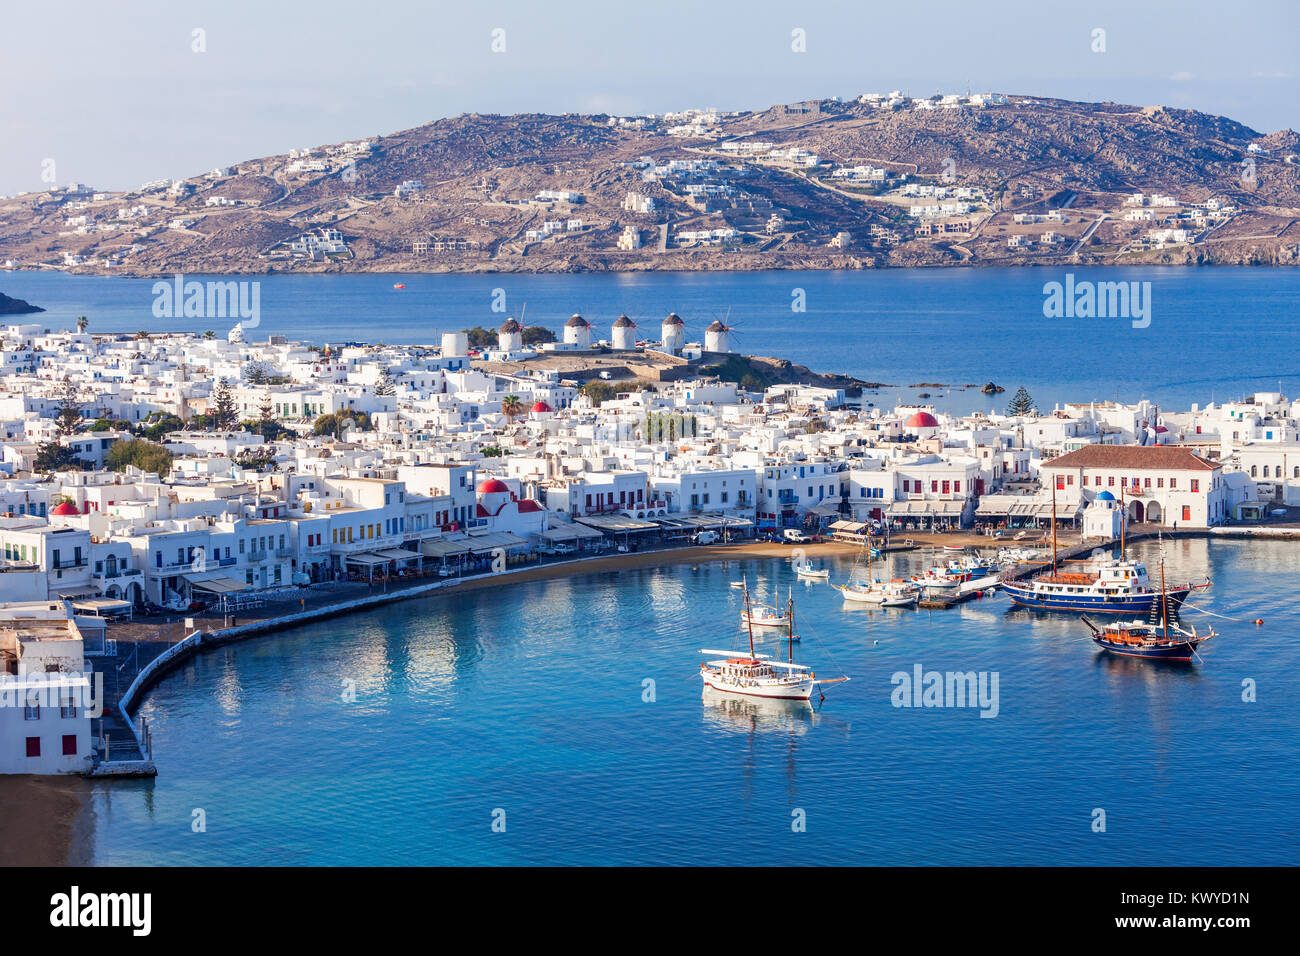 Mykonos island aerial panoramic view. Mykonos is a island, part of the Cyclades in Greece. Stock Photo